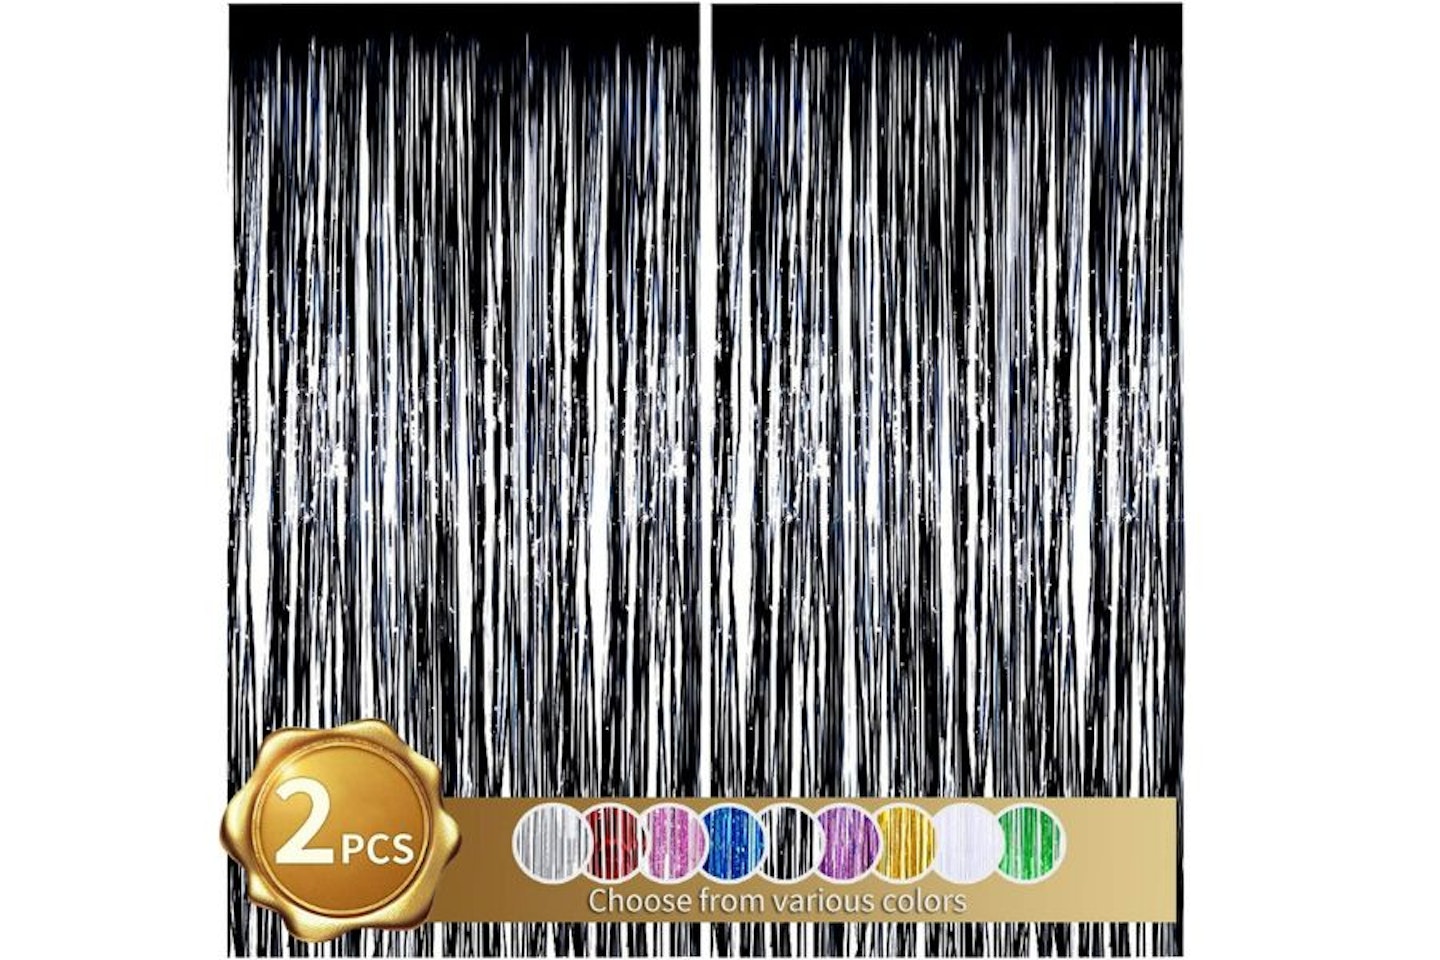 Space party ideas - BEISHIDA 2 Pack Foil Fringe Curtain